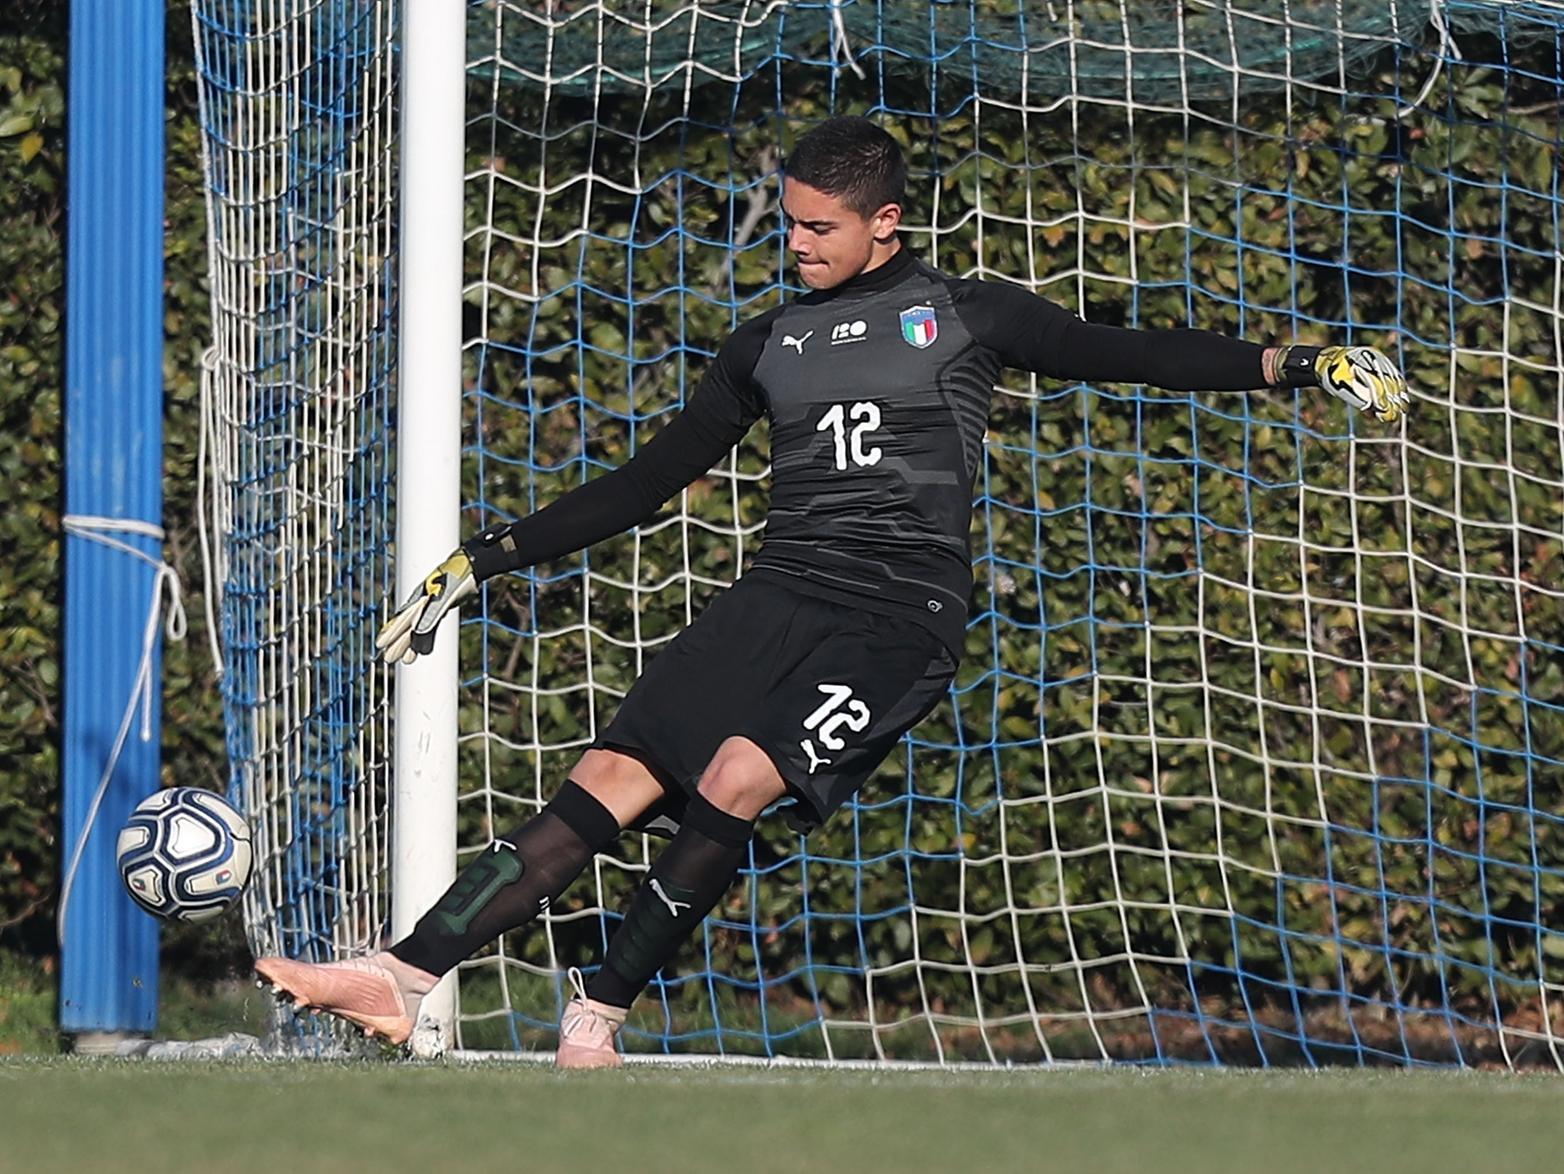 Leeds United are, according to Italian reports, close to signing Italy U18 international goalkeeper Elia Caprile, who could join from Chievo this month. (Sport Witness)